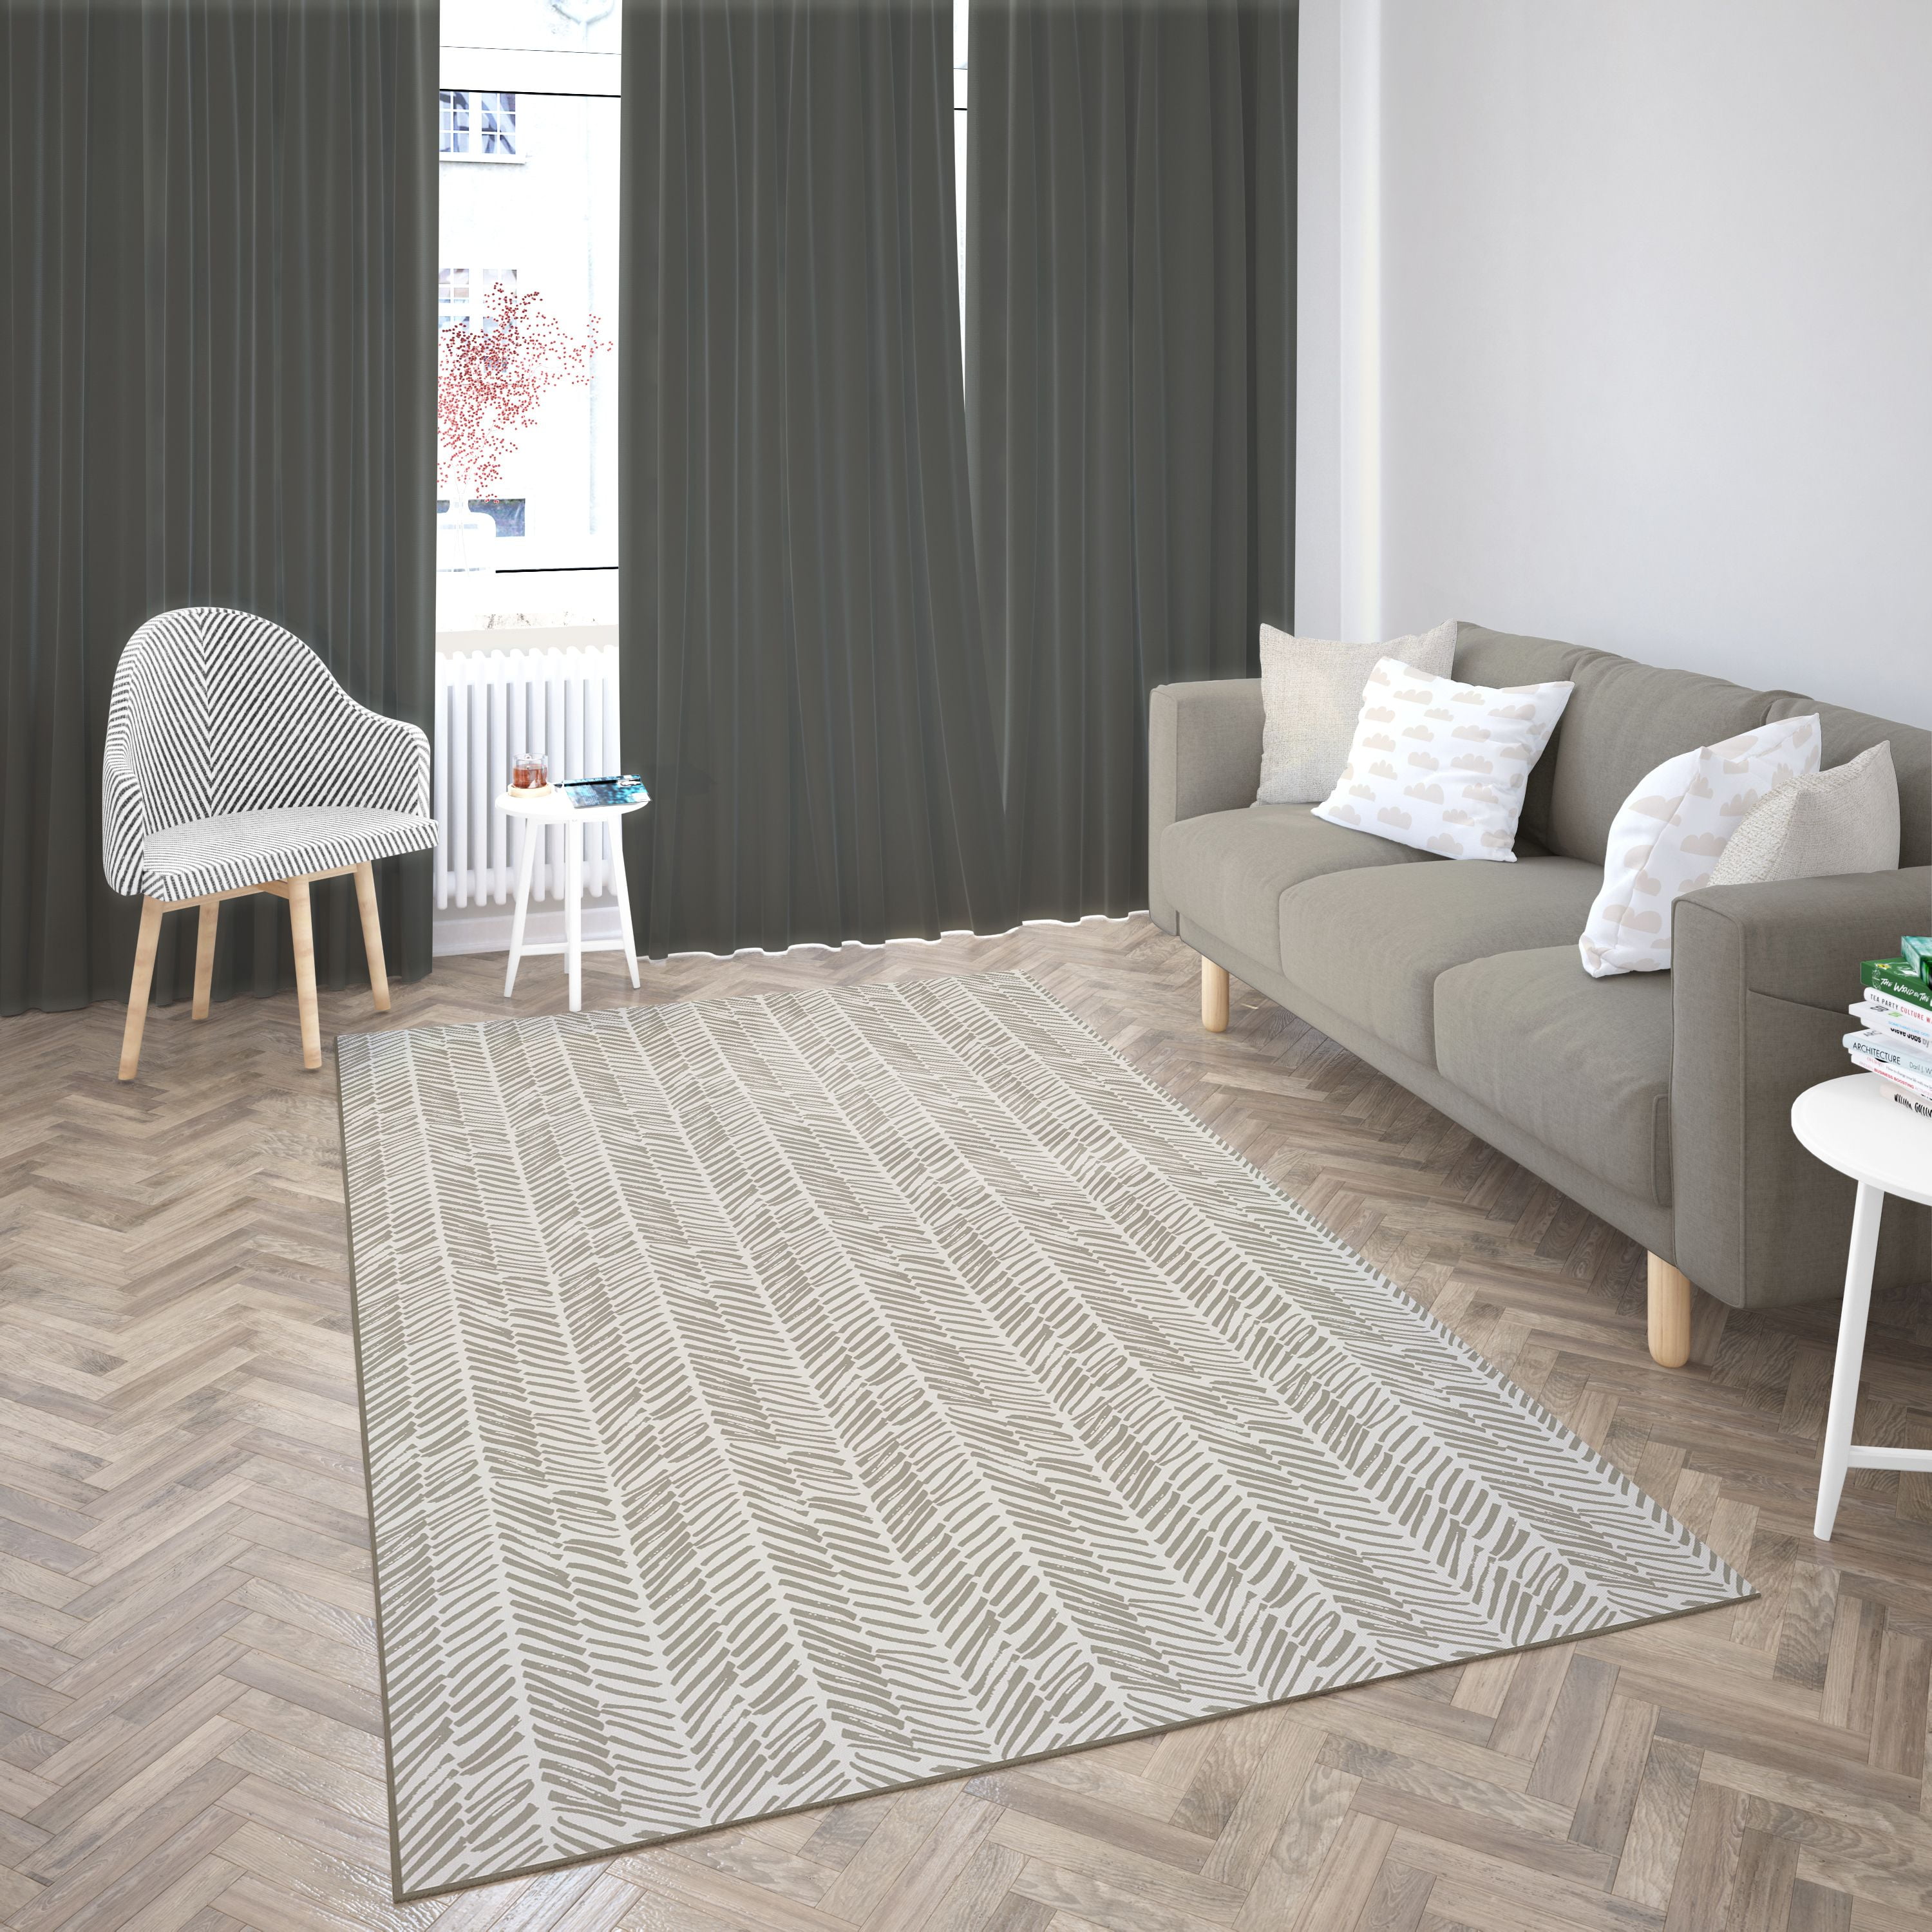 Deerlux Modern Living Room Area Rug with Nonslip Backing, Abstract